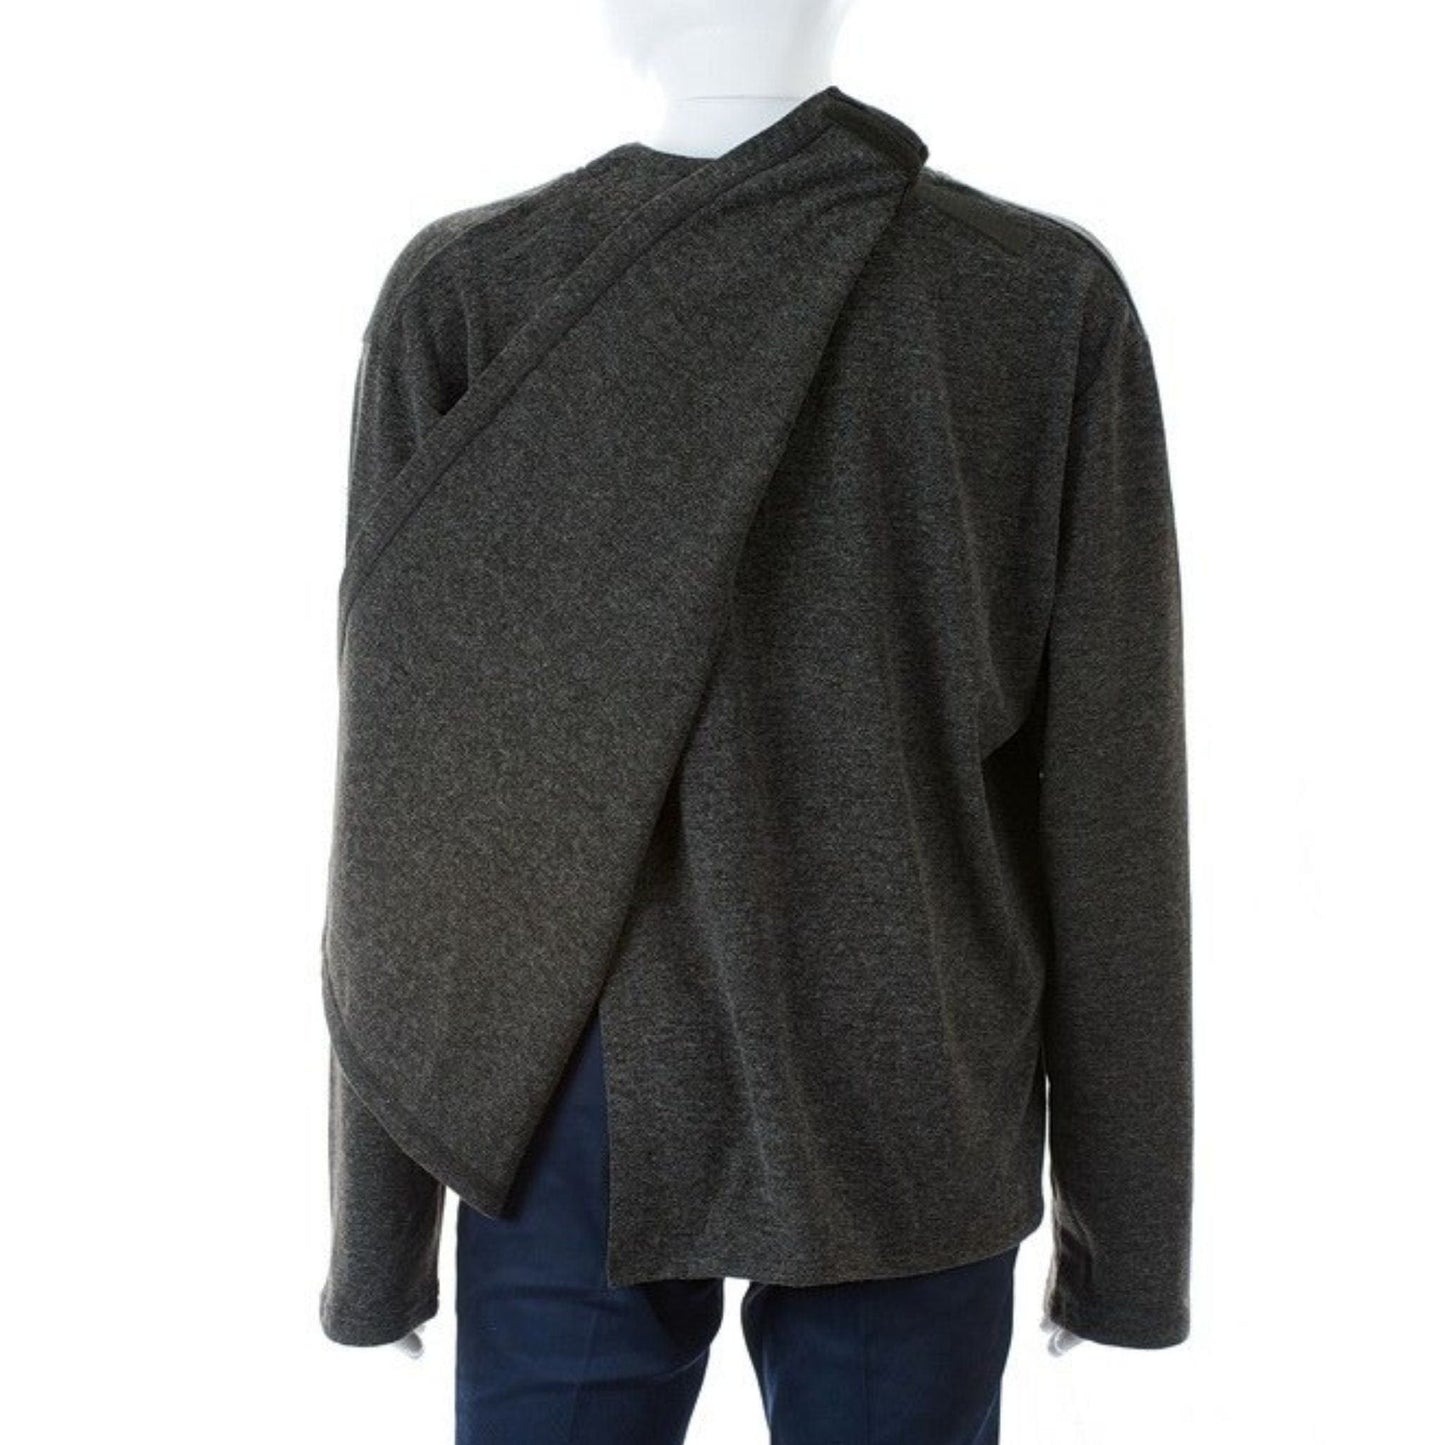 Men's Open Back Cardigan - Charcoal Grey - Sale - Caring Clothing